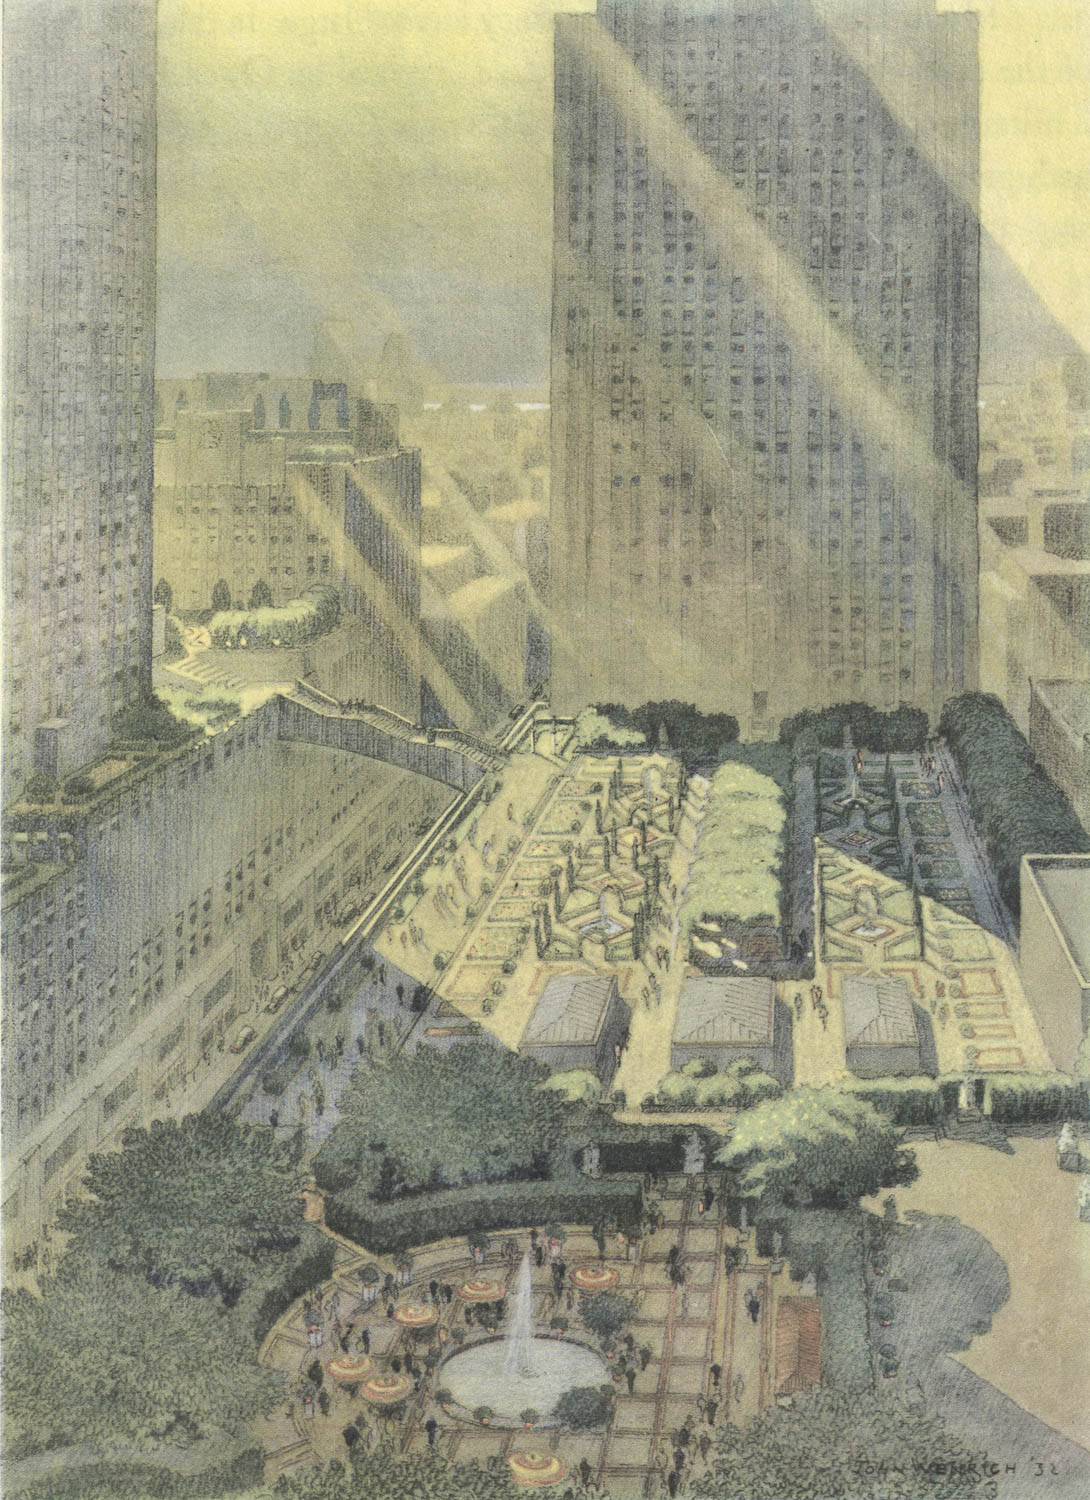 A color drawing of a birds-eye view of the roof terrace of a low skyscraper. In the foreground, people gather around tables under umbrellas around a small patio with a fountain in the center. In a more distant part of the roof are rows of small trees and symmetrical flower beds. A tall skyscraper rises up from the end of the terrace. A pedestrian bridge connects this roof terrace with the roof terrace of a neighboring building. To the right is a glimpse of a road with cars four or five stories below.